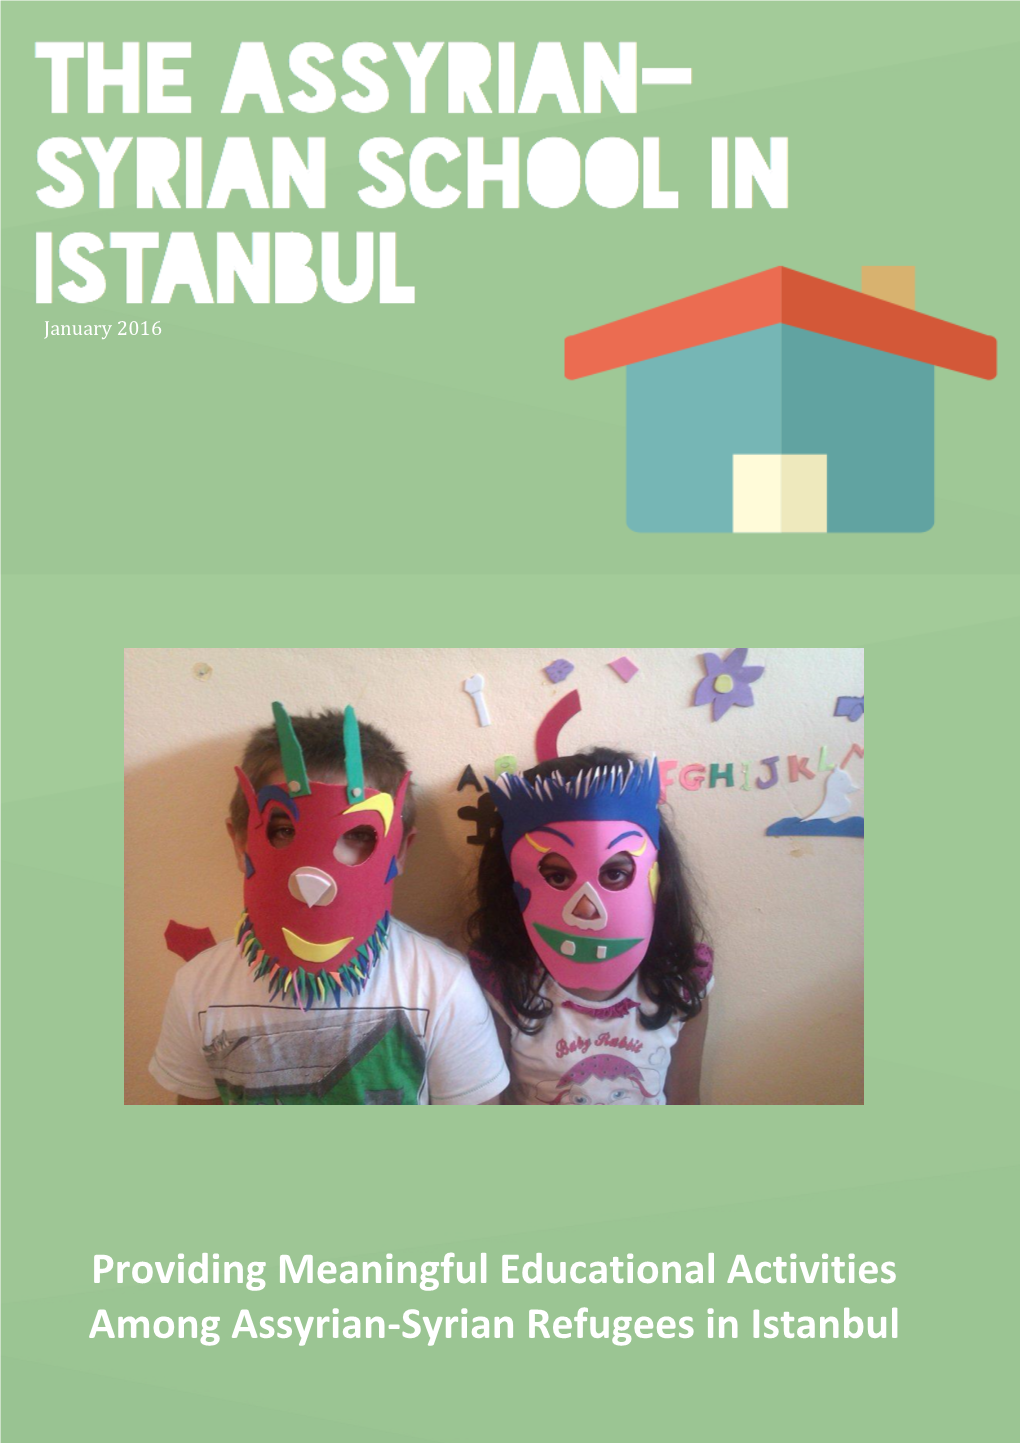 Providing Meaningful Educational Activities Among Assyrian-Syrian Refugees in Istanbul the Assyrian-Syrian School in Istanbul, ‘The Qnushyo’* August, 2015